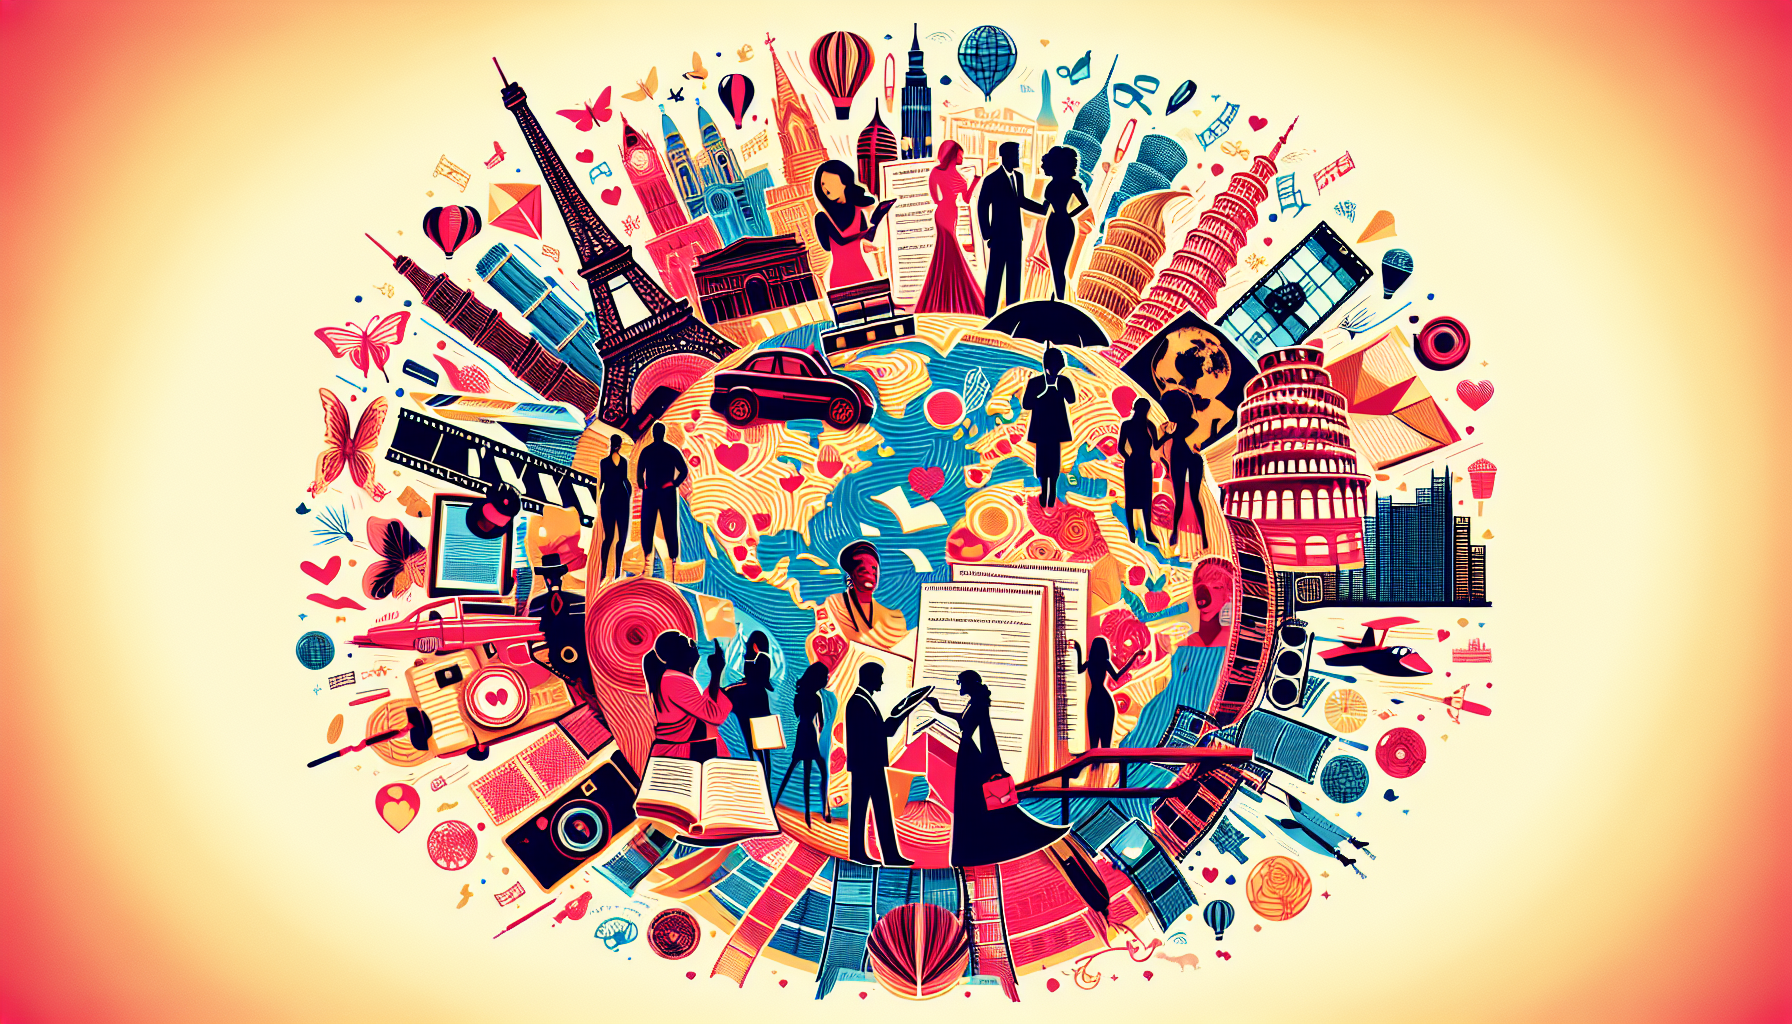 Create a coherent and vibrant illustration symbolizing the concept of 'Global Romance: Adapting Your Screenplay for International Markets'. The design should lean towards a modern aesthetic. Picture silhouettes of various iconic world landmarks, like the Eiffel Tower, the Pyramids of Egypt, the Great Wall of China, and others, transcending across a globe scattered with script pages and film reels. Grant the illustration a sense of unity and love by showcasing various couples of different descents, such as a black woman and Caucasian man in Paris, a Hispanic man and Middle-Eastern woman in Egypt, an Asian man and white woman in China. These couples could be engaging in activities such as reading scripts, writing, acting or watching a movie. Remember the illustration should not contain any text.